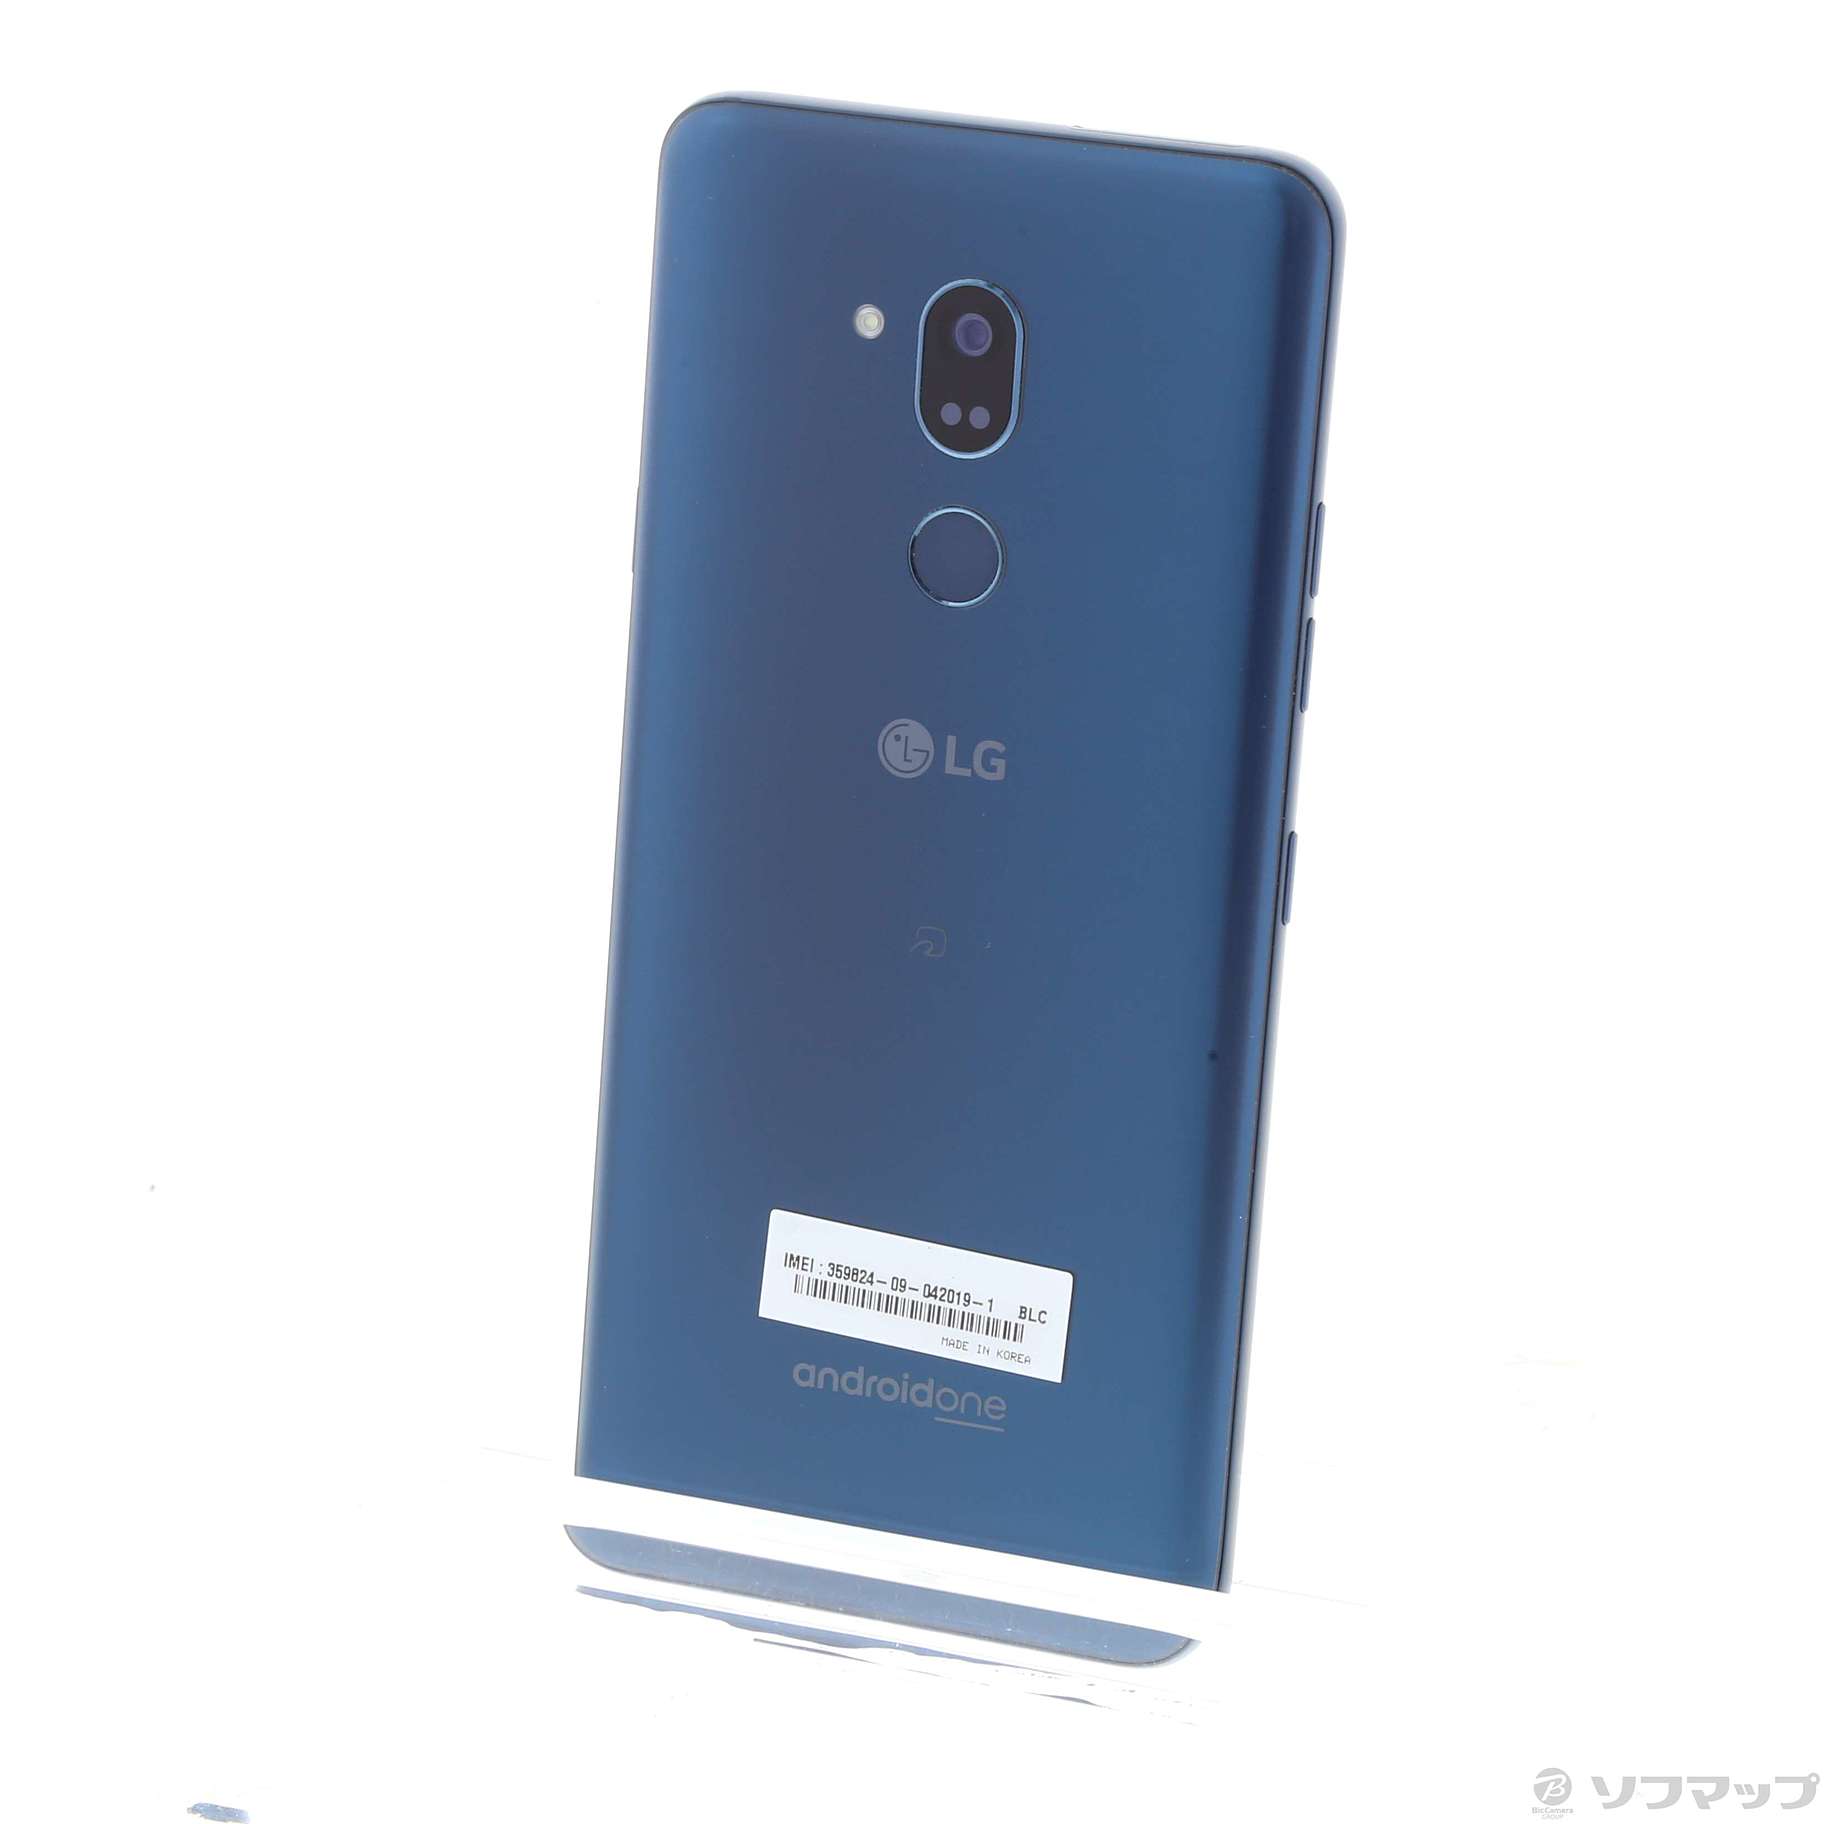 Android One X5 32GB ニューモロッカンブルー X5-LG Y!mobile